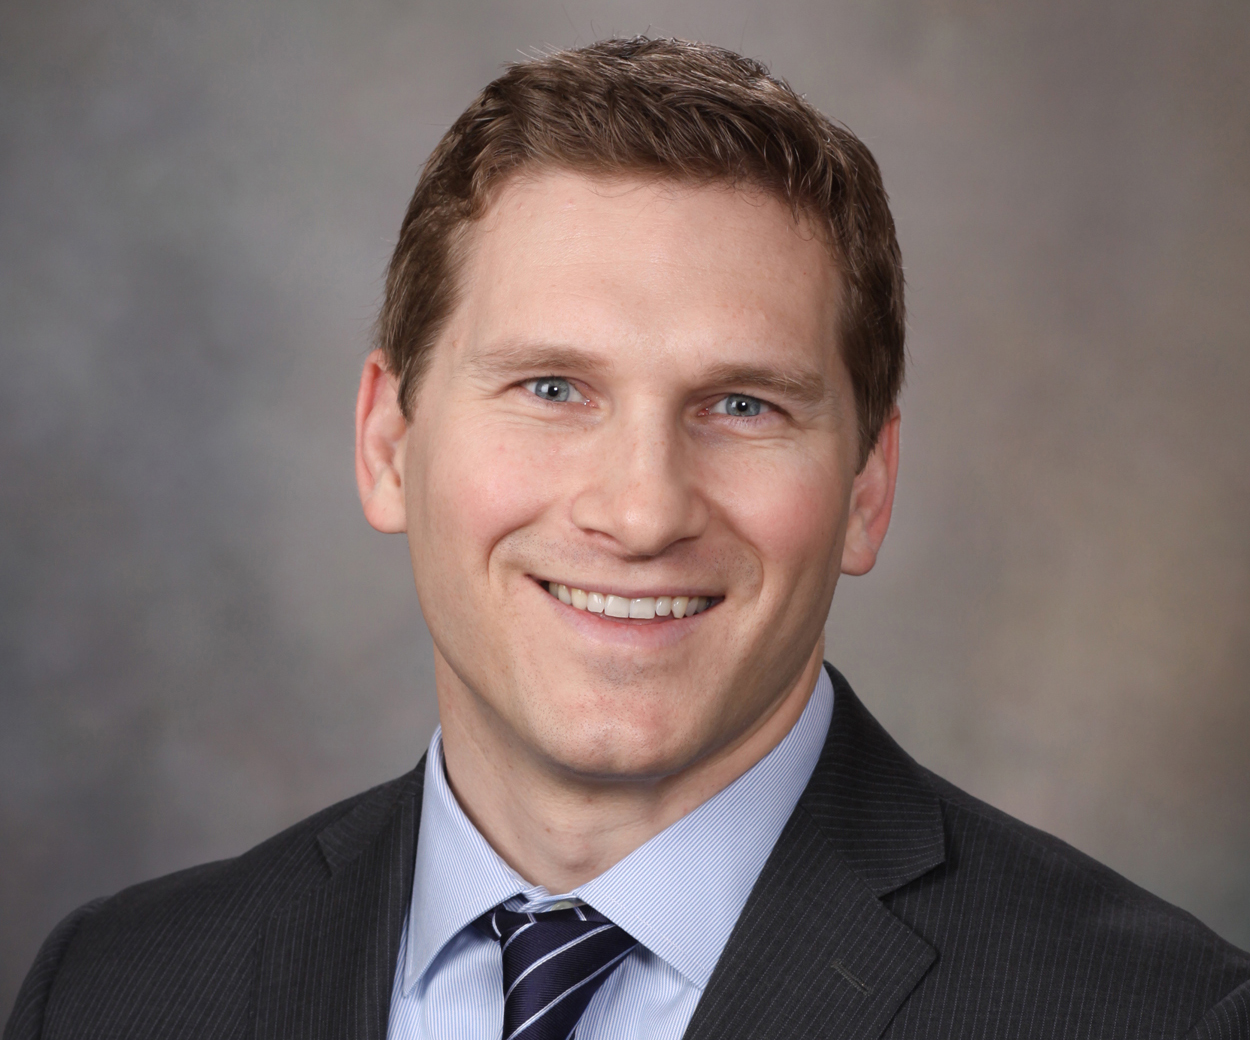 image of Aaron Krych, MD